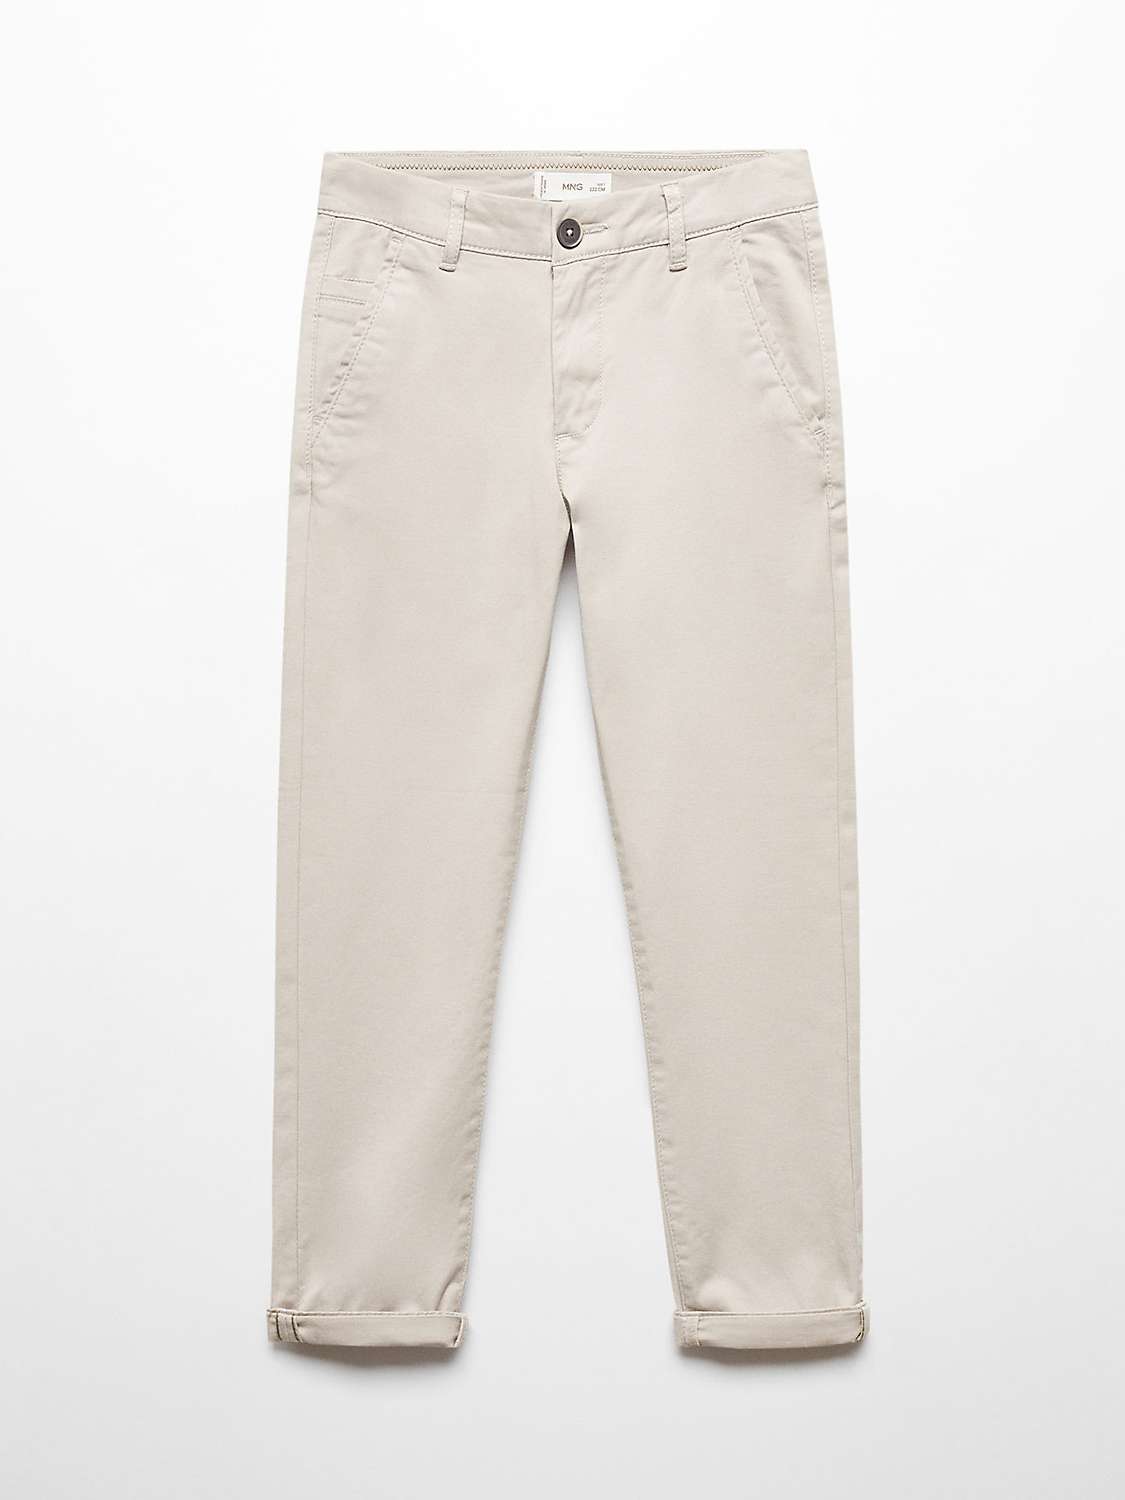 Buy Mango Kids' Piccolo Cotton Blend Chino Trousers Online at johnlewis.com